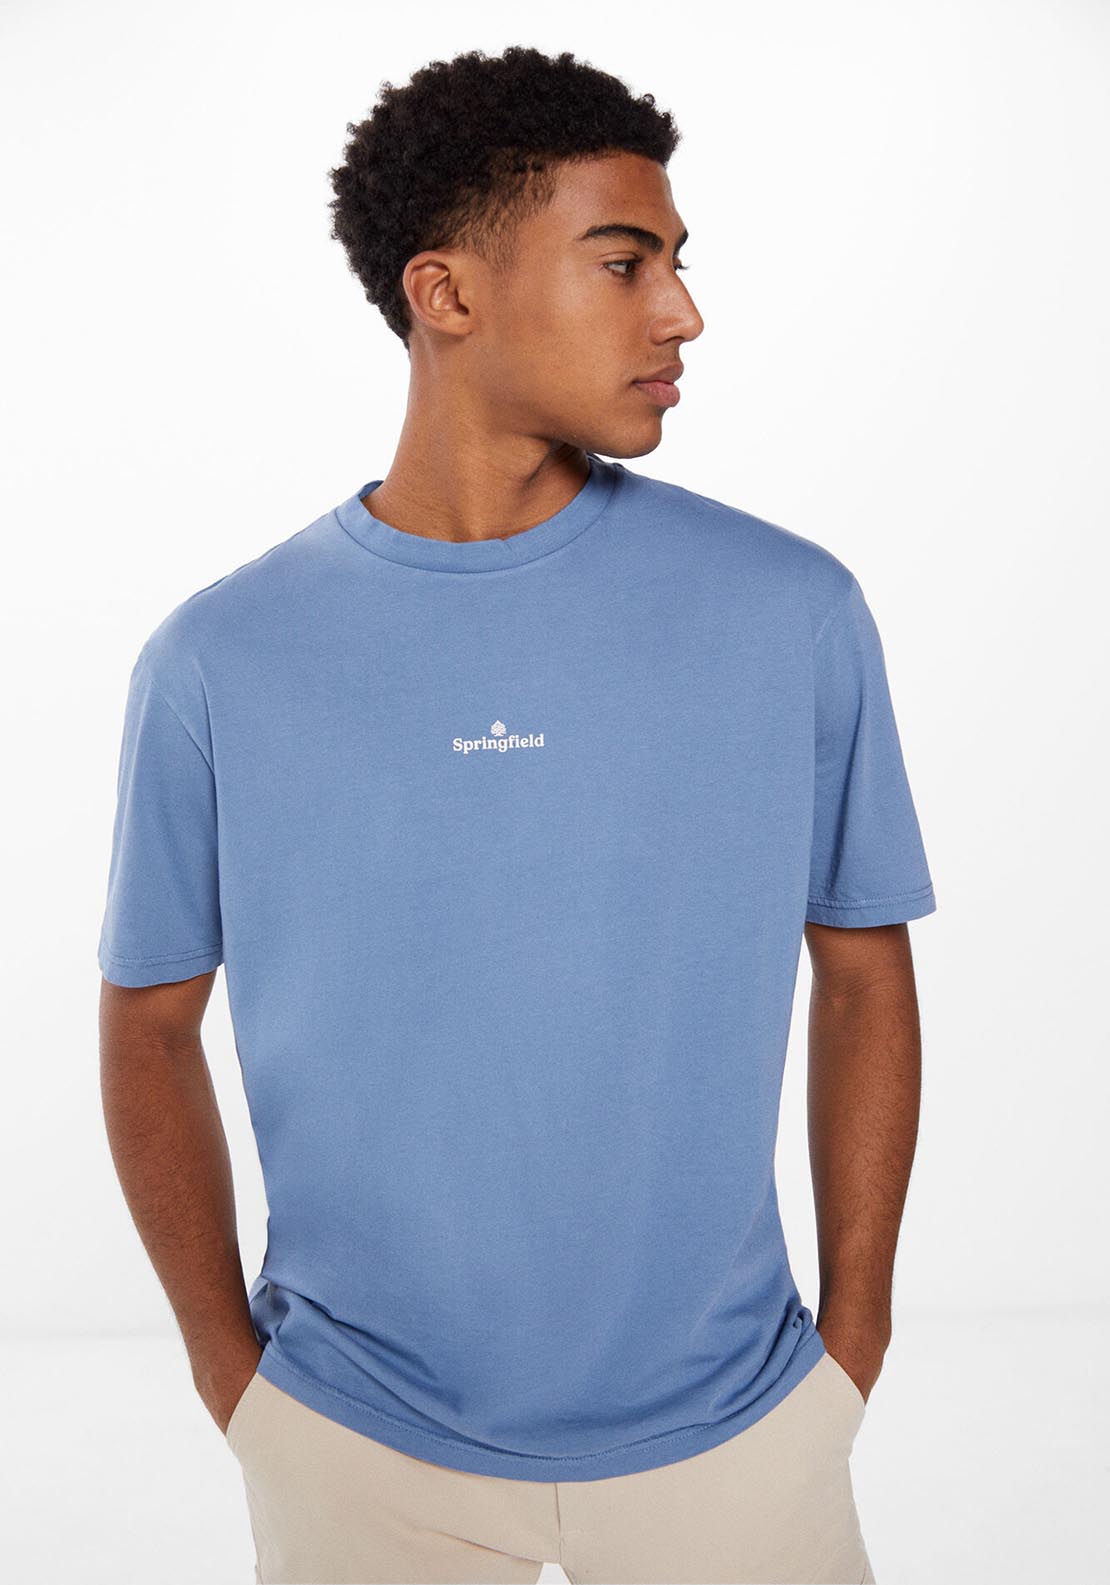 Springfield Washed T-shirt with logo - Blue 1 Shaws Department Stores